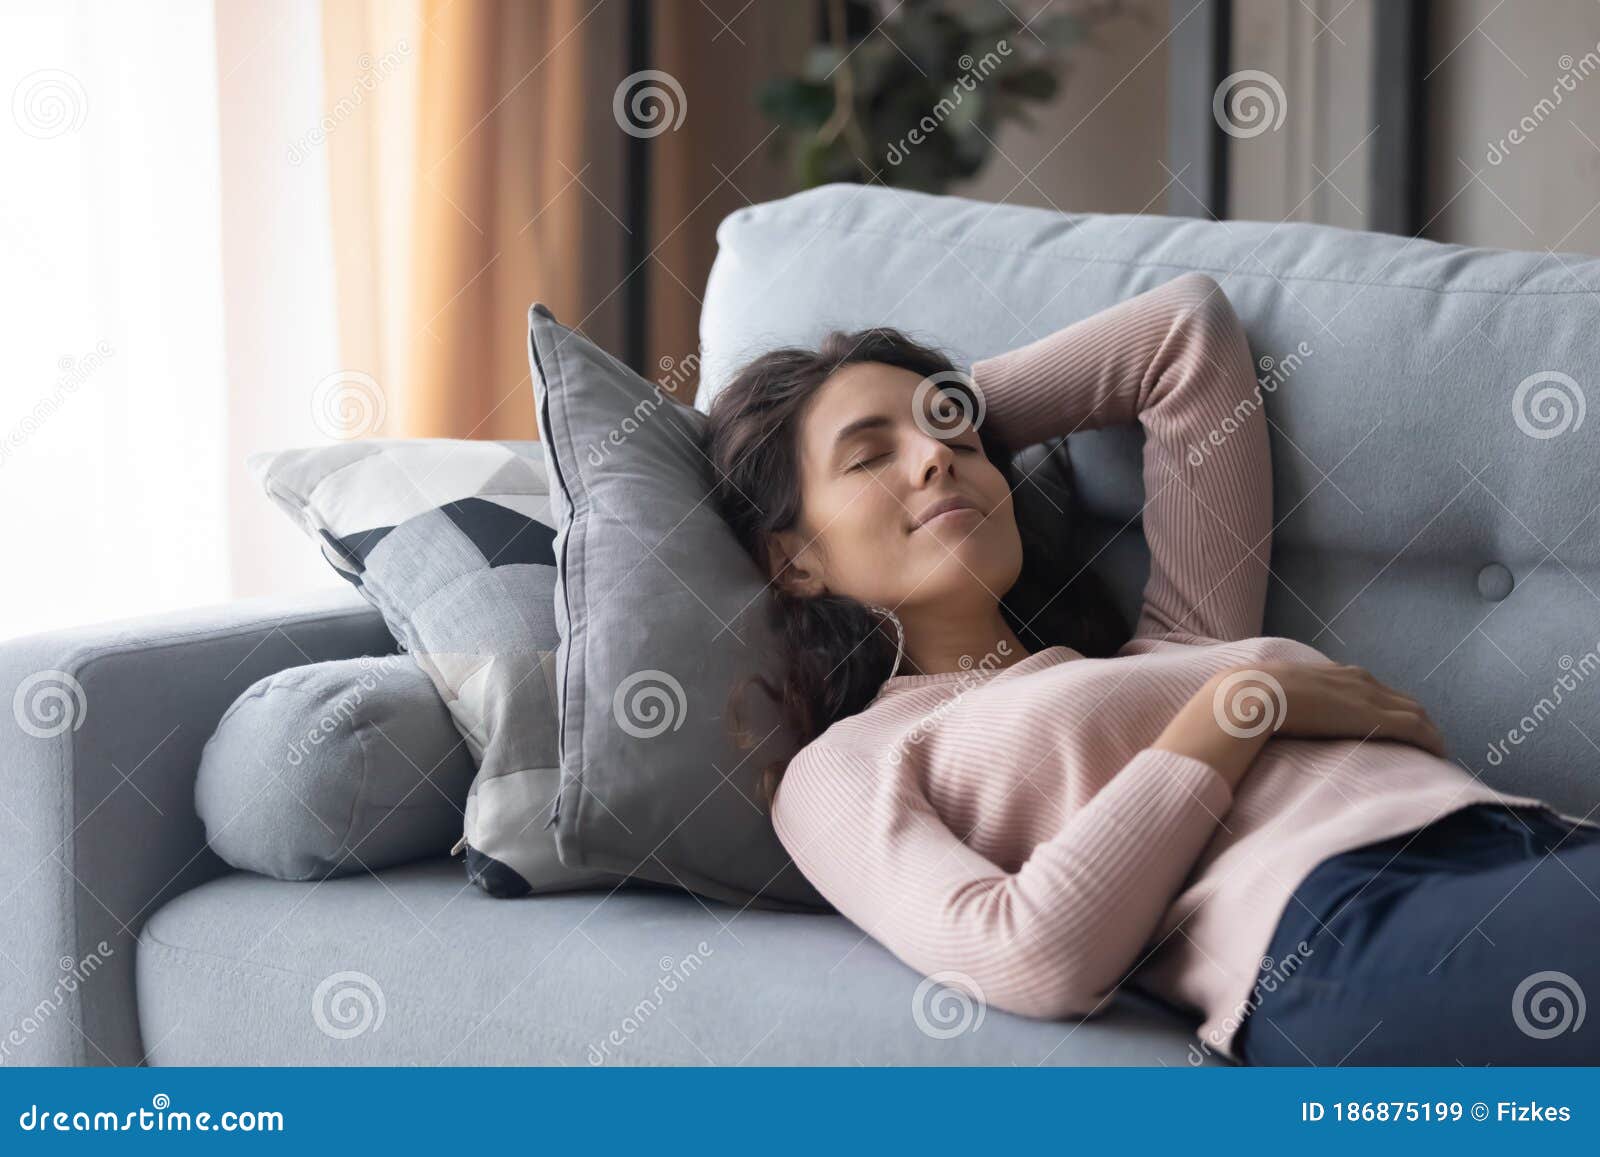 Peaceful Beautiful Woman Sleeping On Cozy Couch In Living Room Stock